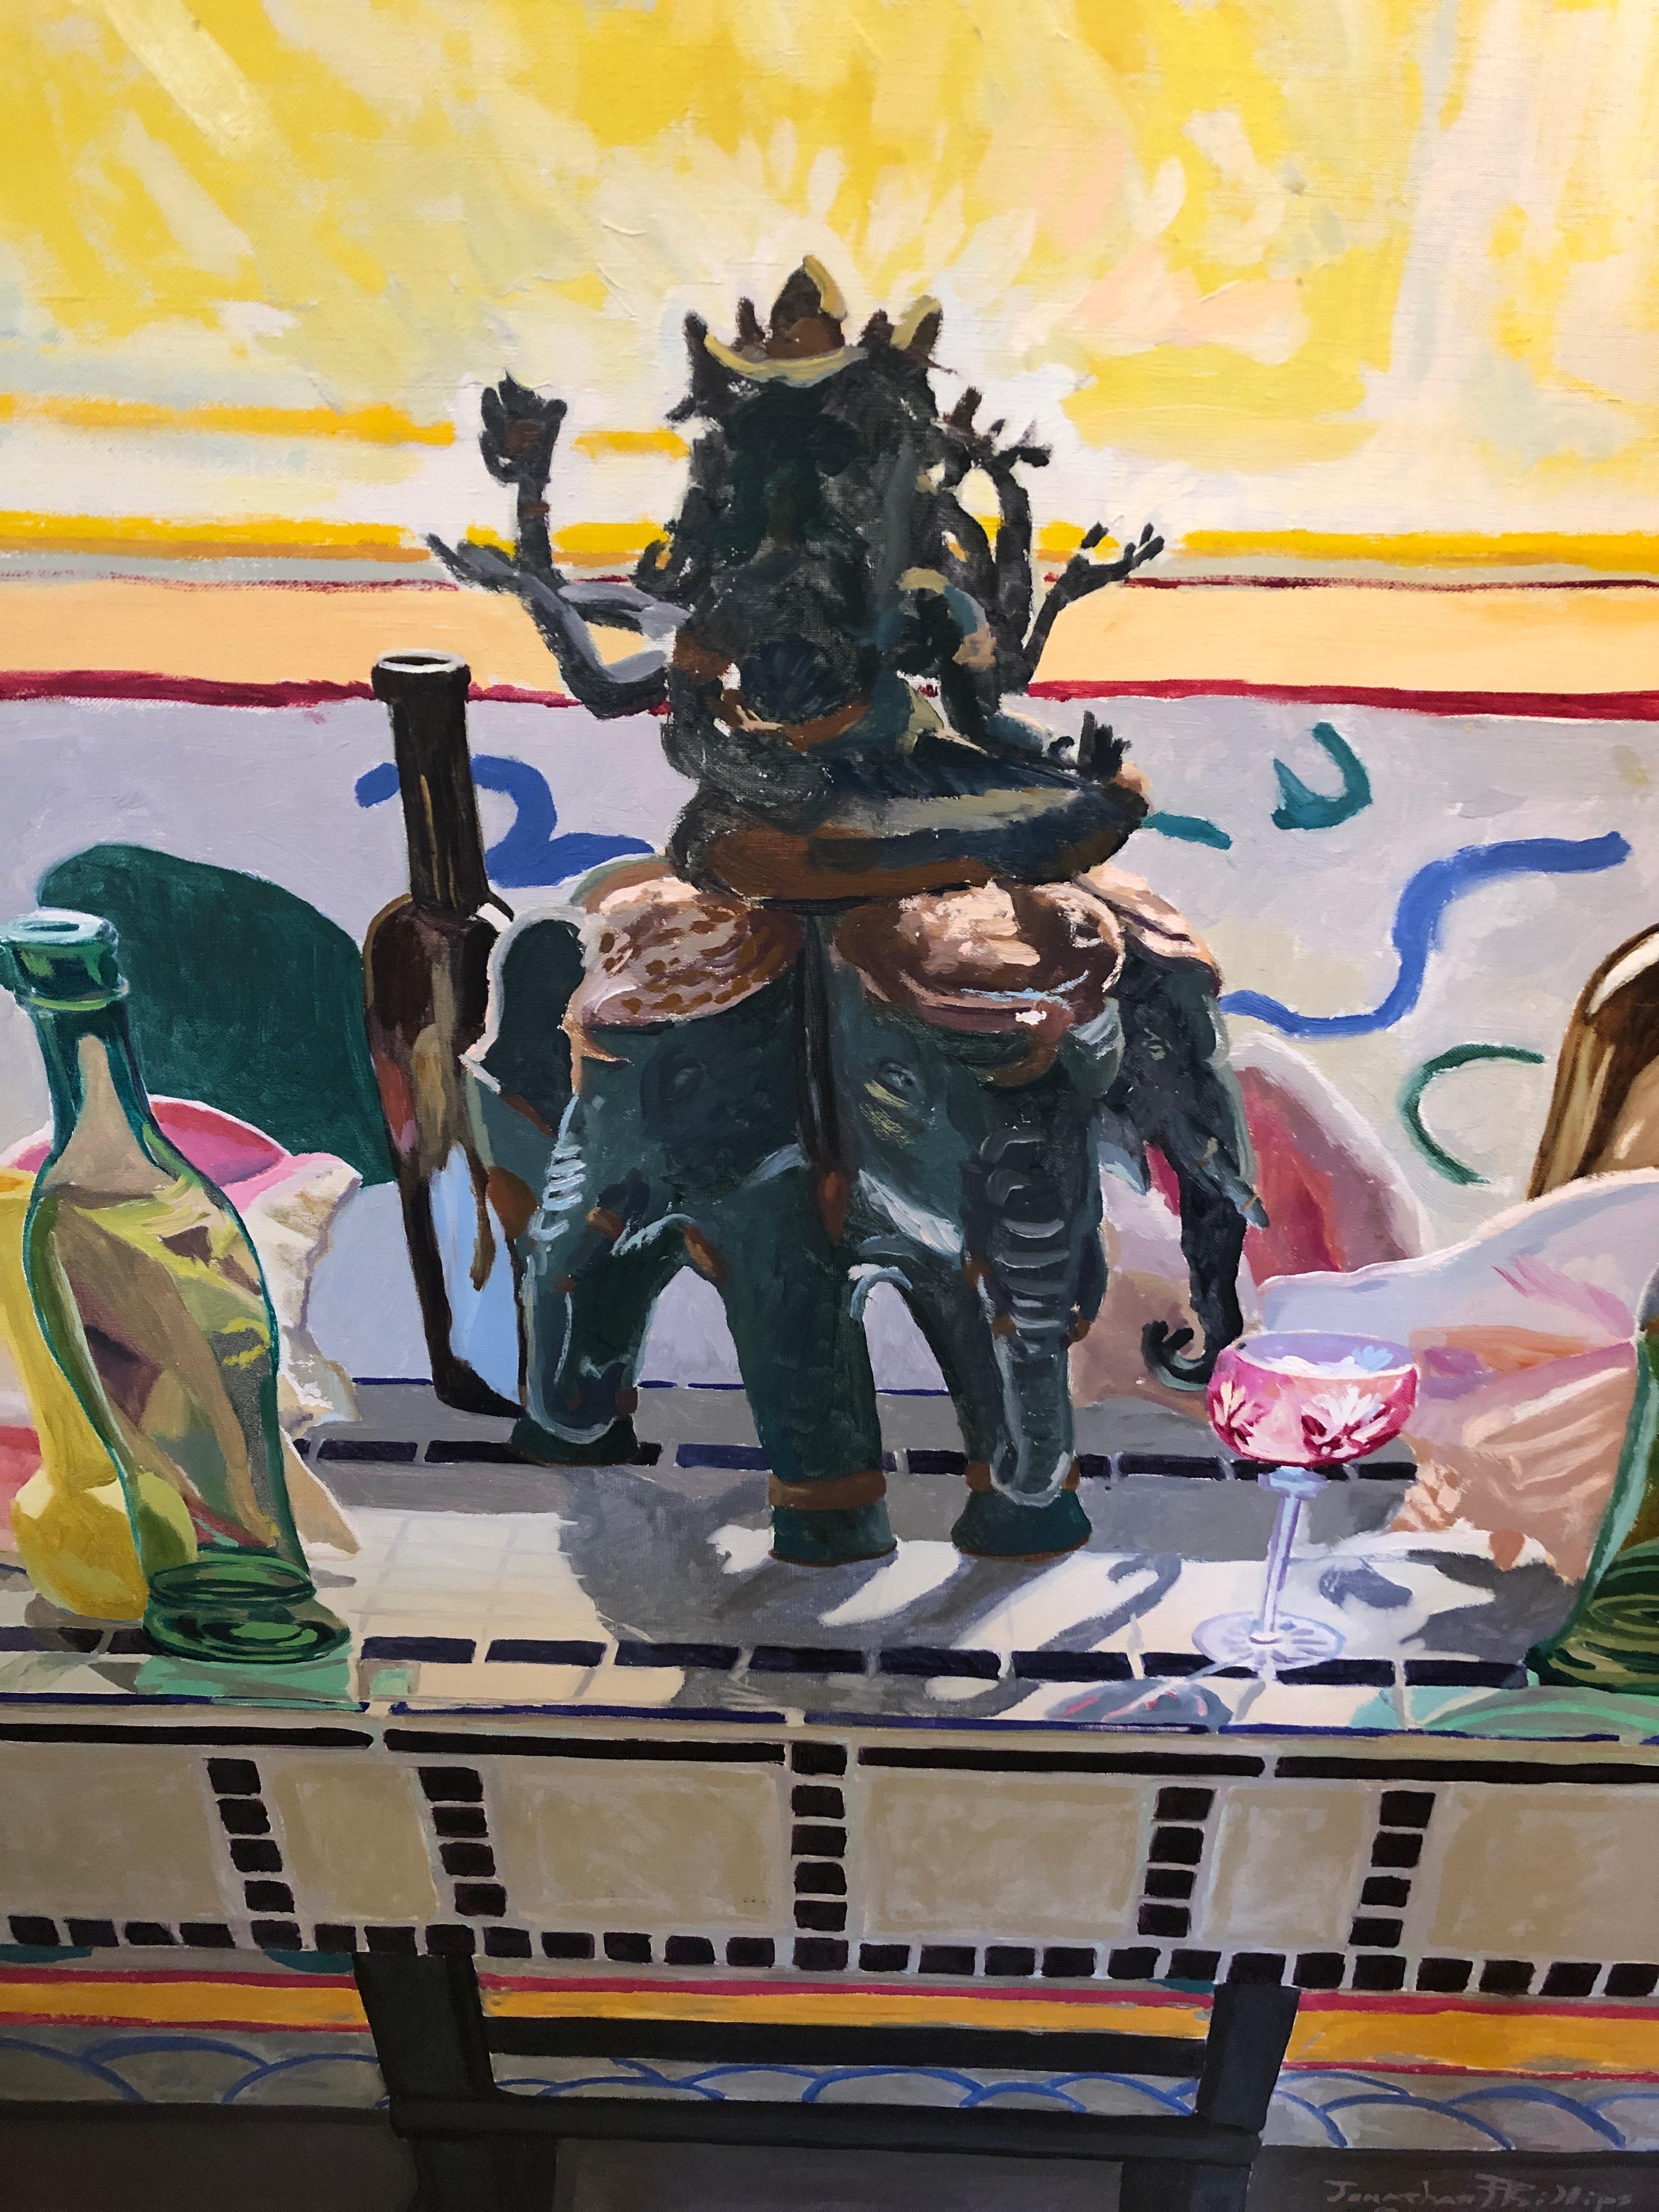 A big bold still life by Jonathan Phillips having an elephant sculpture, collection of bottles, and riot of patterns and bright colors. Signed lower right, dated 1992.